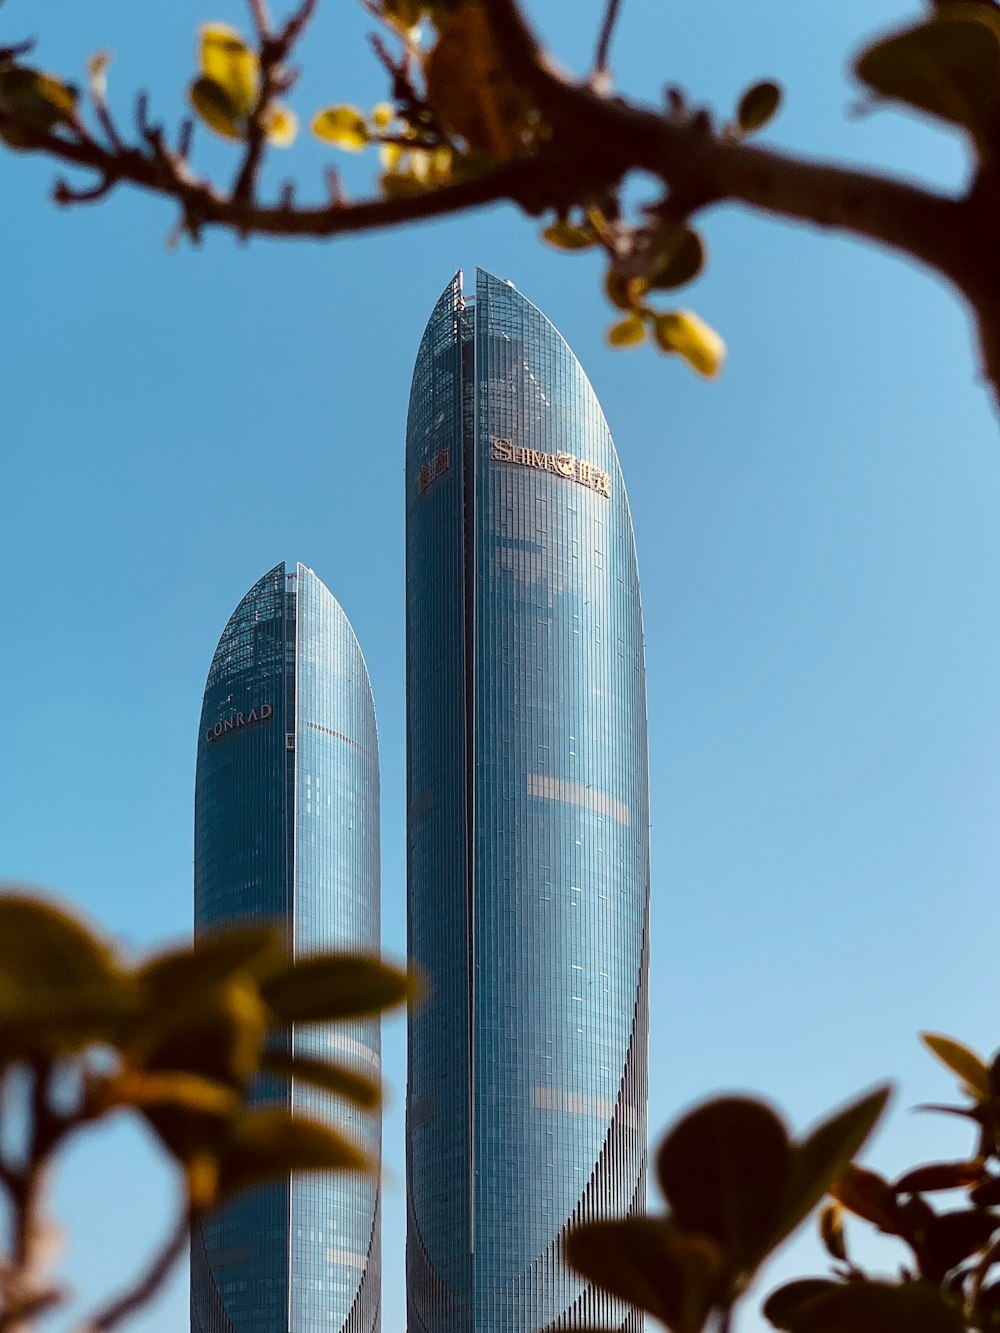 two tall skyscrapers in the middle of a tree